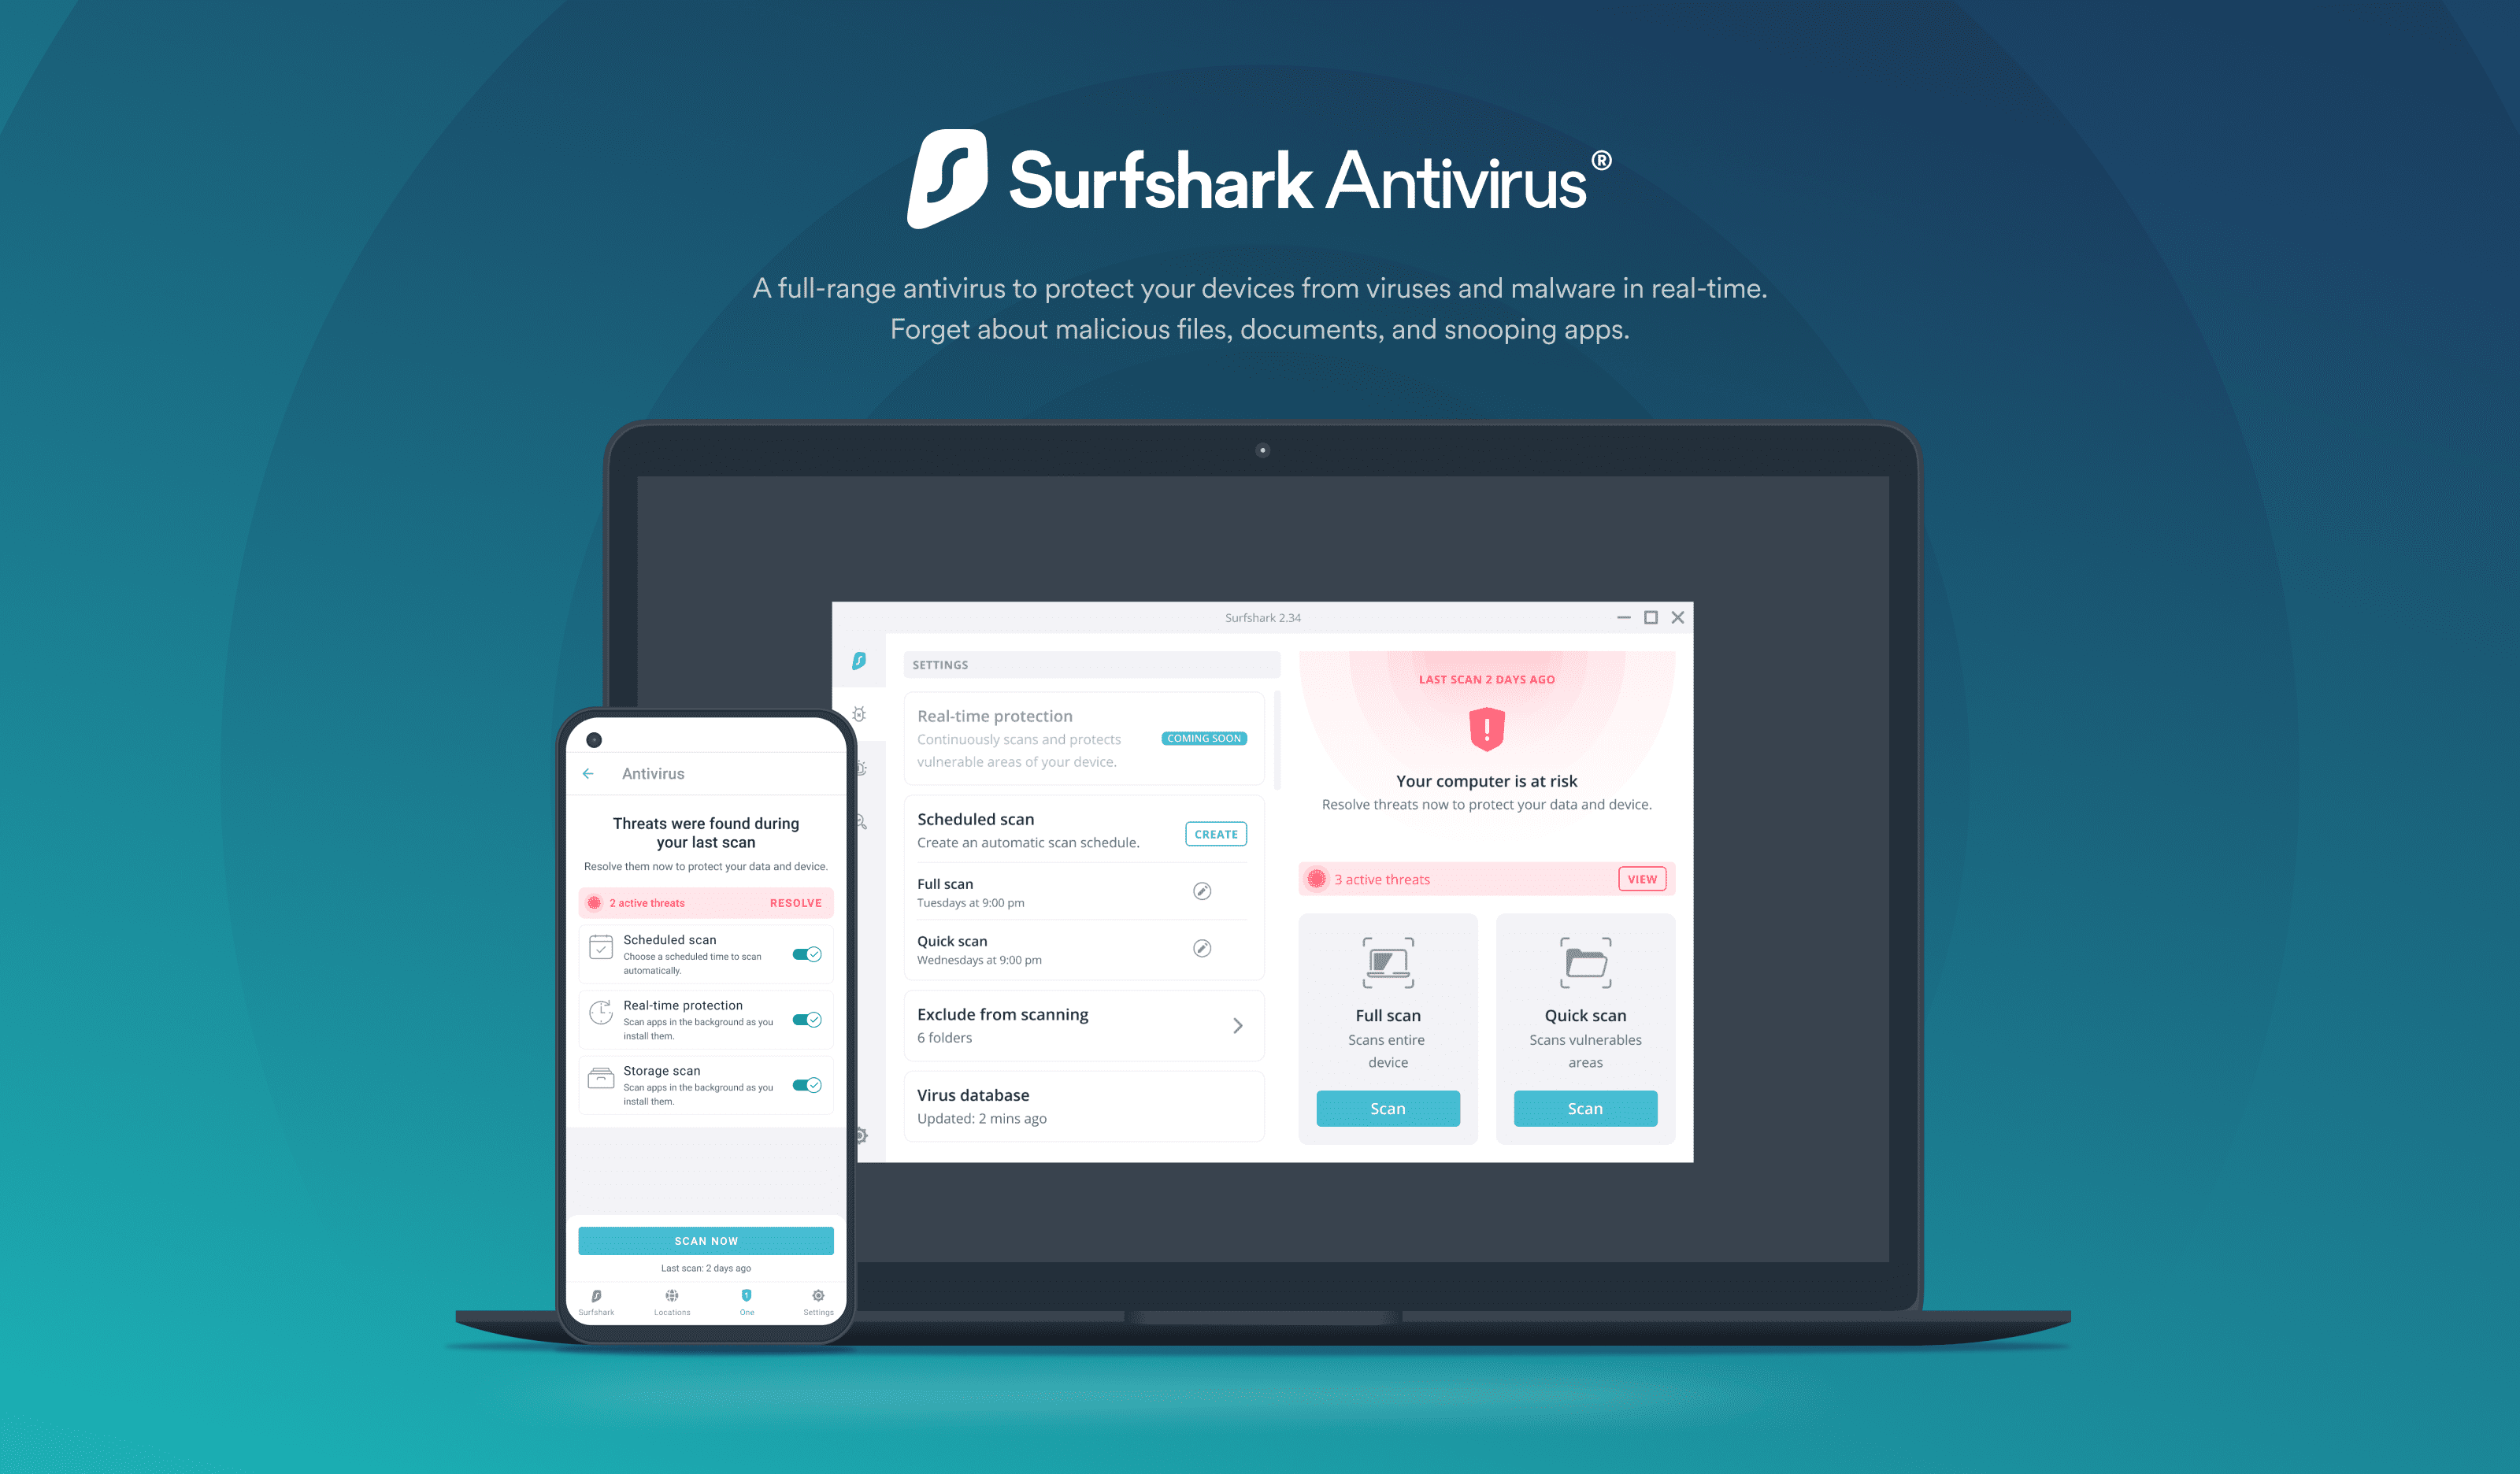 What Antivirus Software Is Ranked #1 For This Year